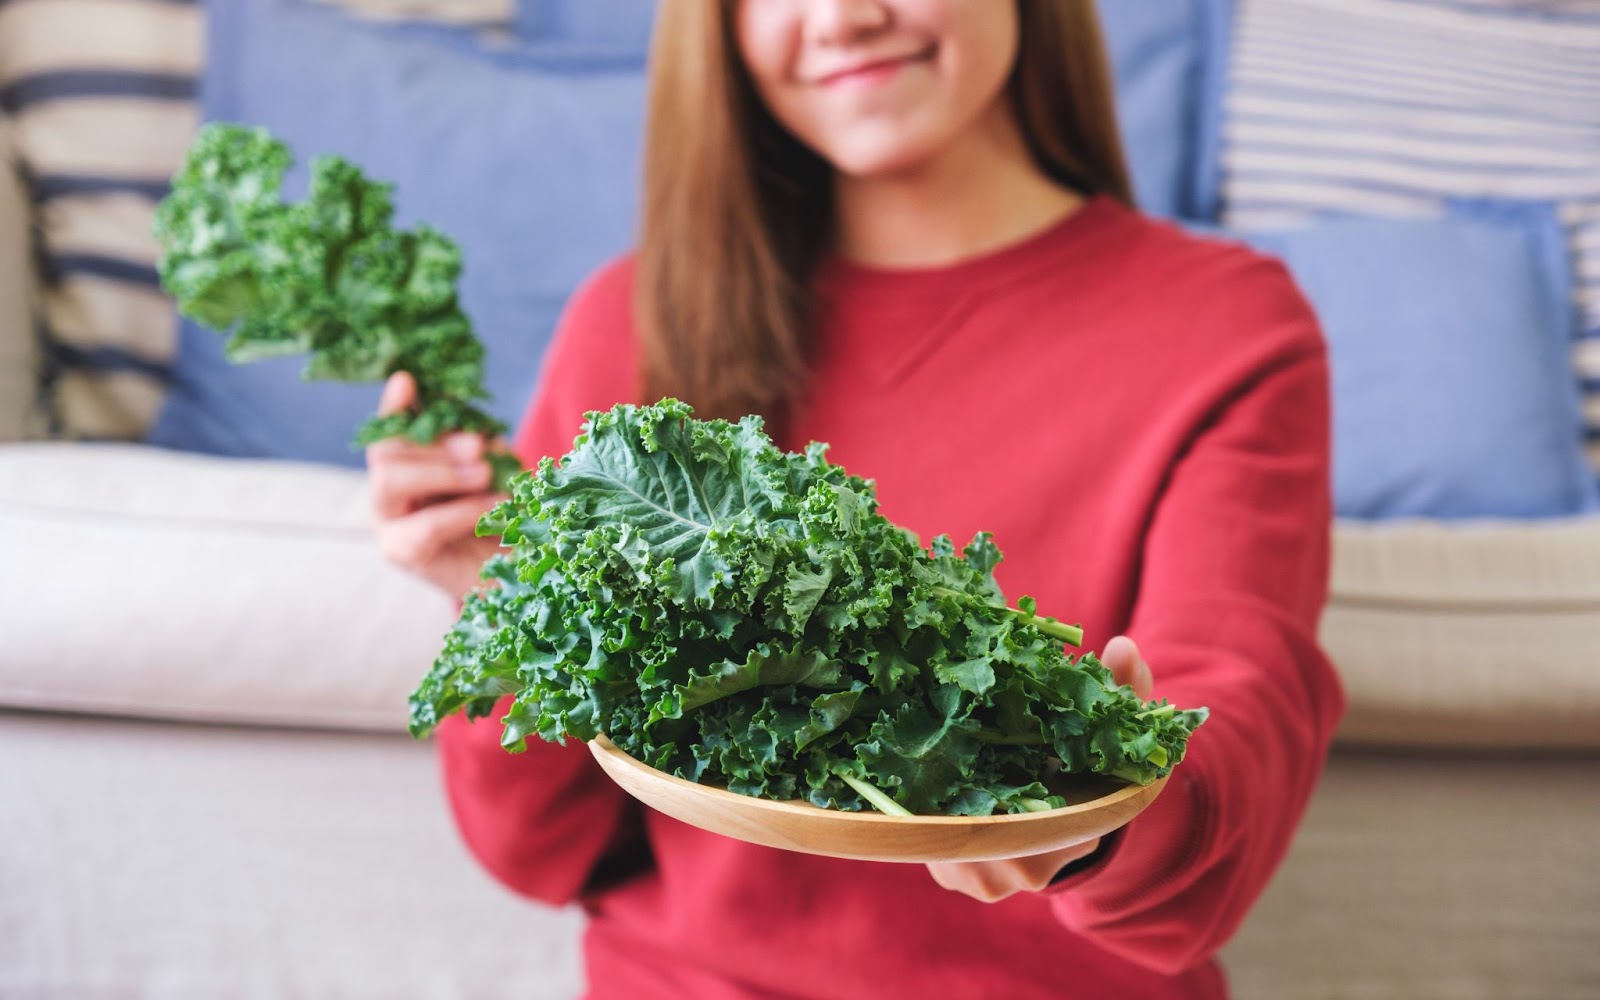 <p>Leafy green vegetables like spinach, kale, and collard greens are nutritional powerhouses that offer a multitude of benefits for your skin. Brimming with vitamins A, C, E, and K, as well as an abundance of minerals and antioxidants, these vibrant greens are essential for maintaining a youthful glow.</p> <p>These nutrients work together to protect your skin from damage caused by free radicals and environmental stressors, while also promoting collagen production, a key protein for maintaining skin elasticity and firmness. Incorporating leafy greens into your diet can lead to healthier, more radiant skin. Enjoy them in salads, blend them into smoothies, add them to stir-fries, or simply sauté them with olive oil and garlic for a delicious and nutritious side dish.</p>